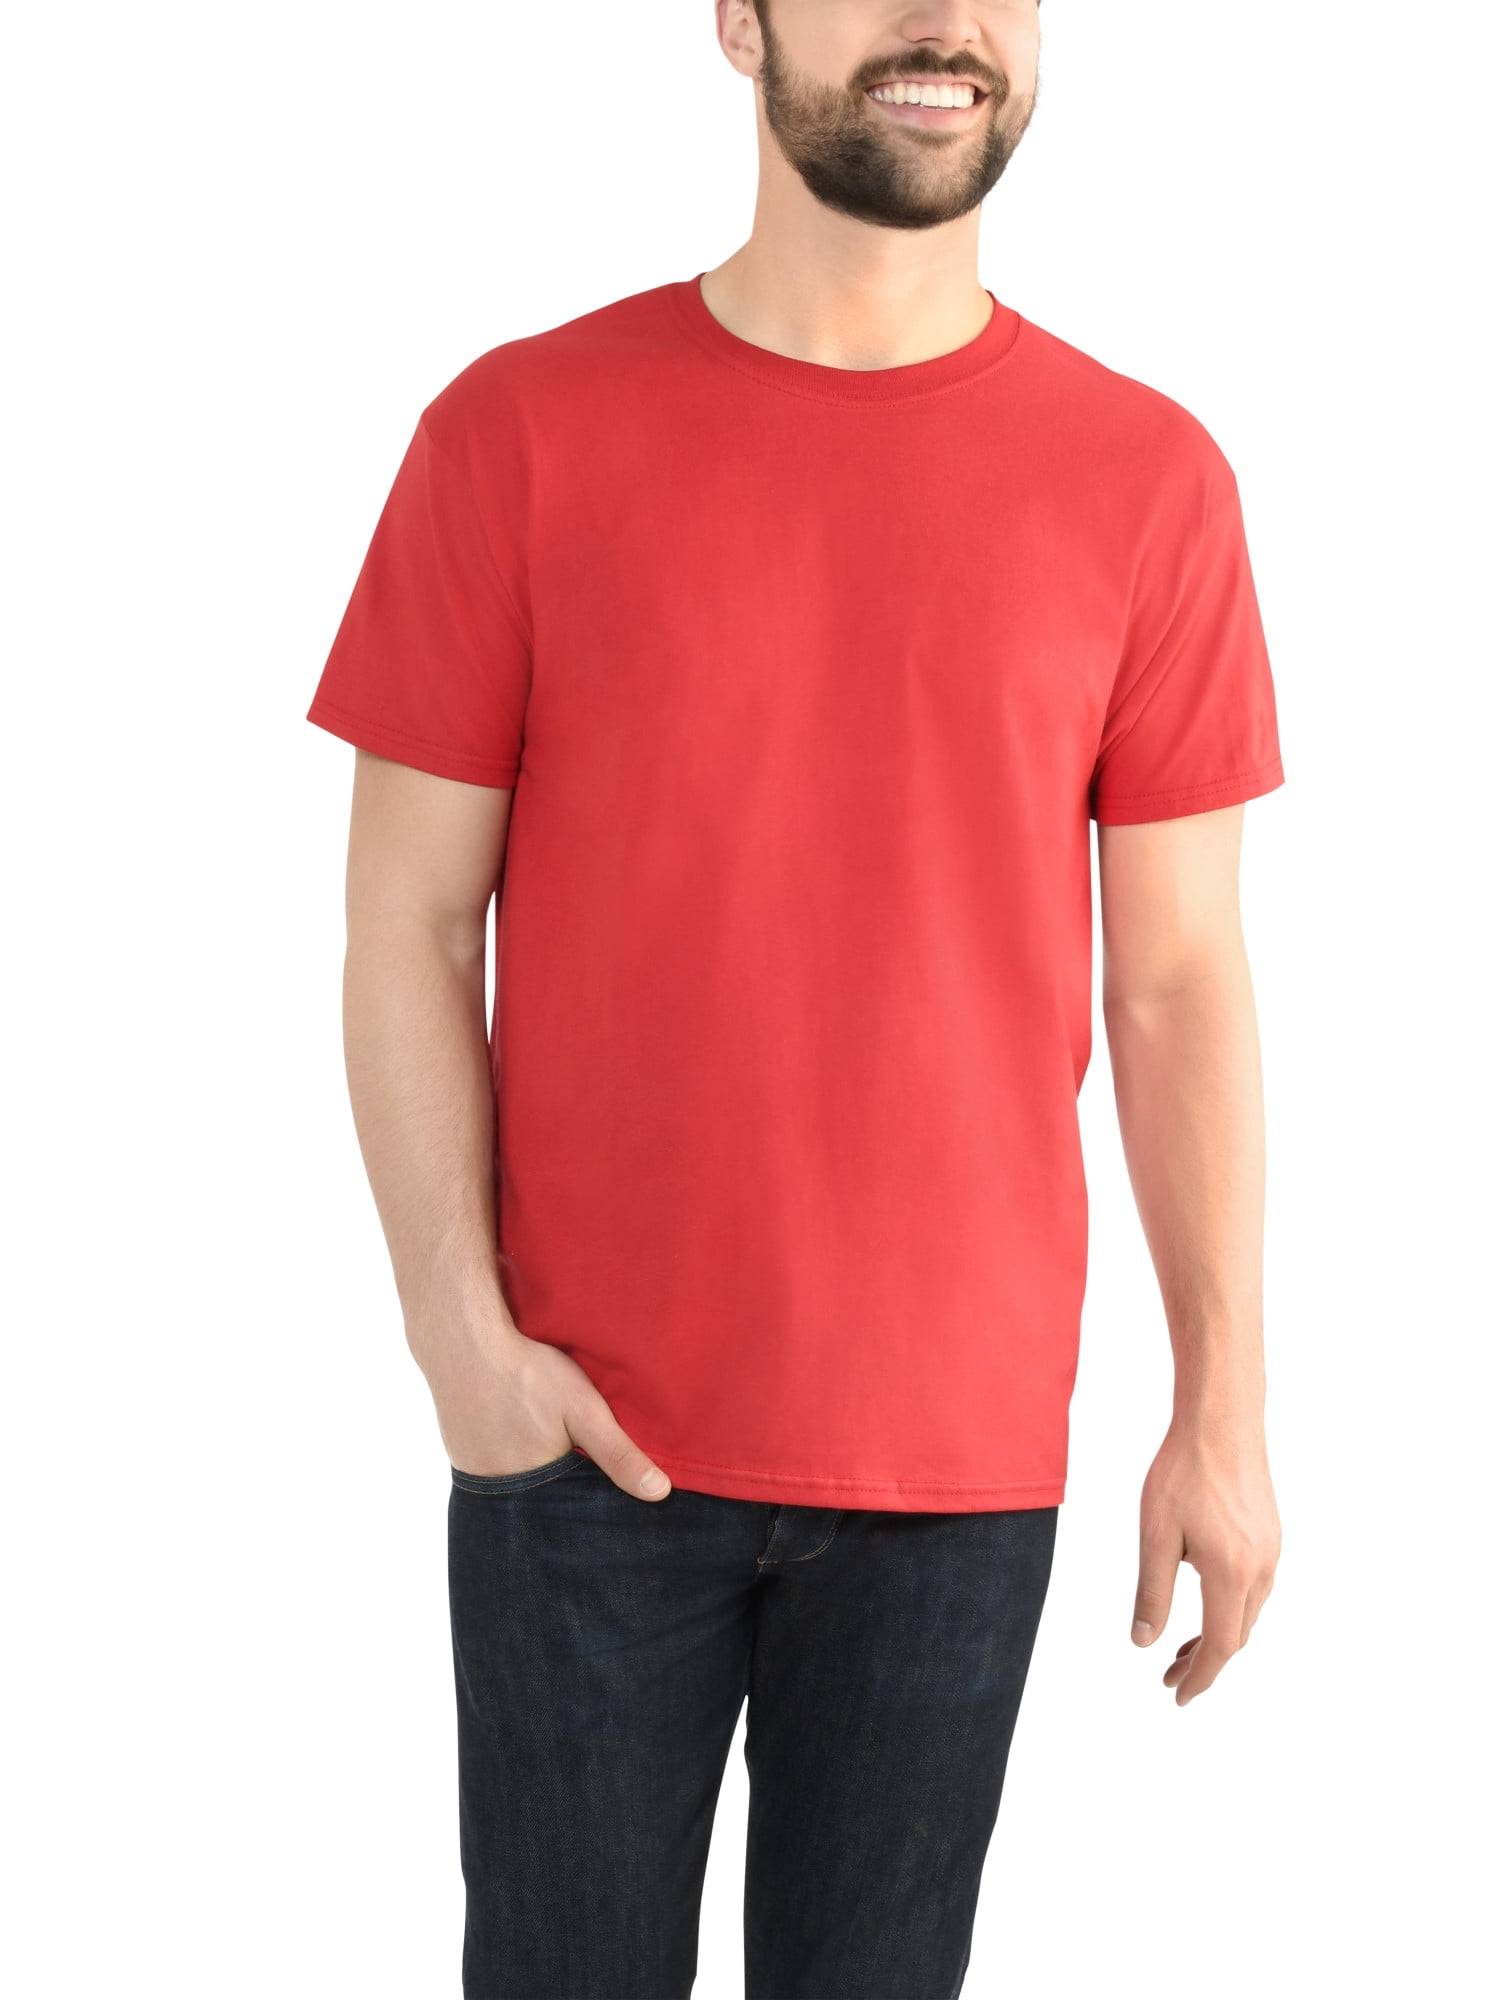 Fruit of the Loom Mens 8-Pack Softer Crew T-shirt